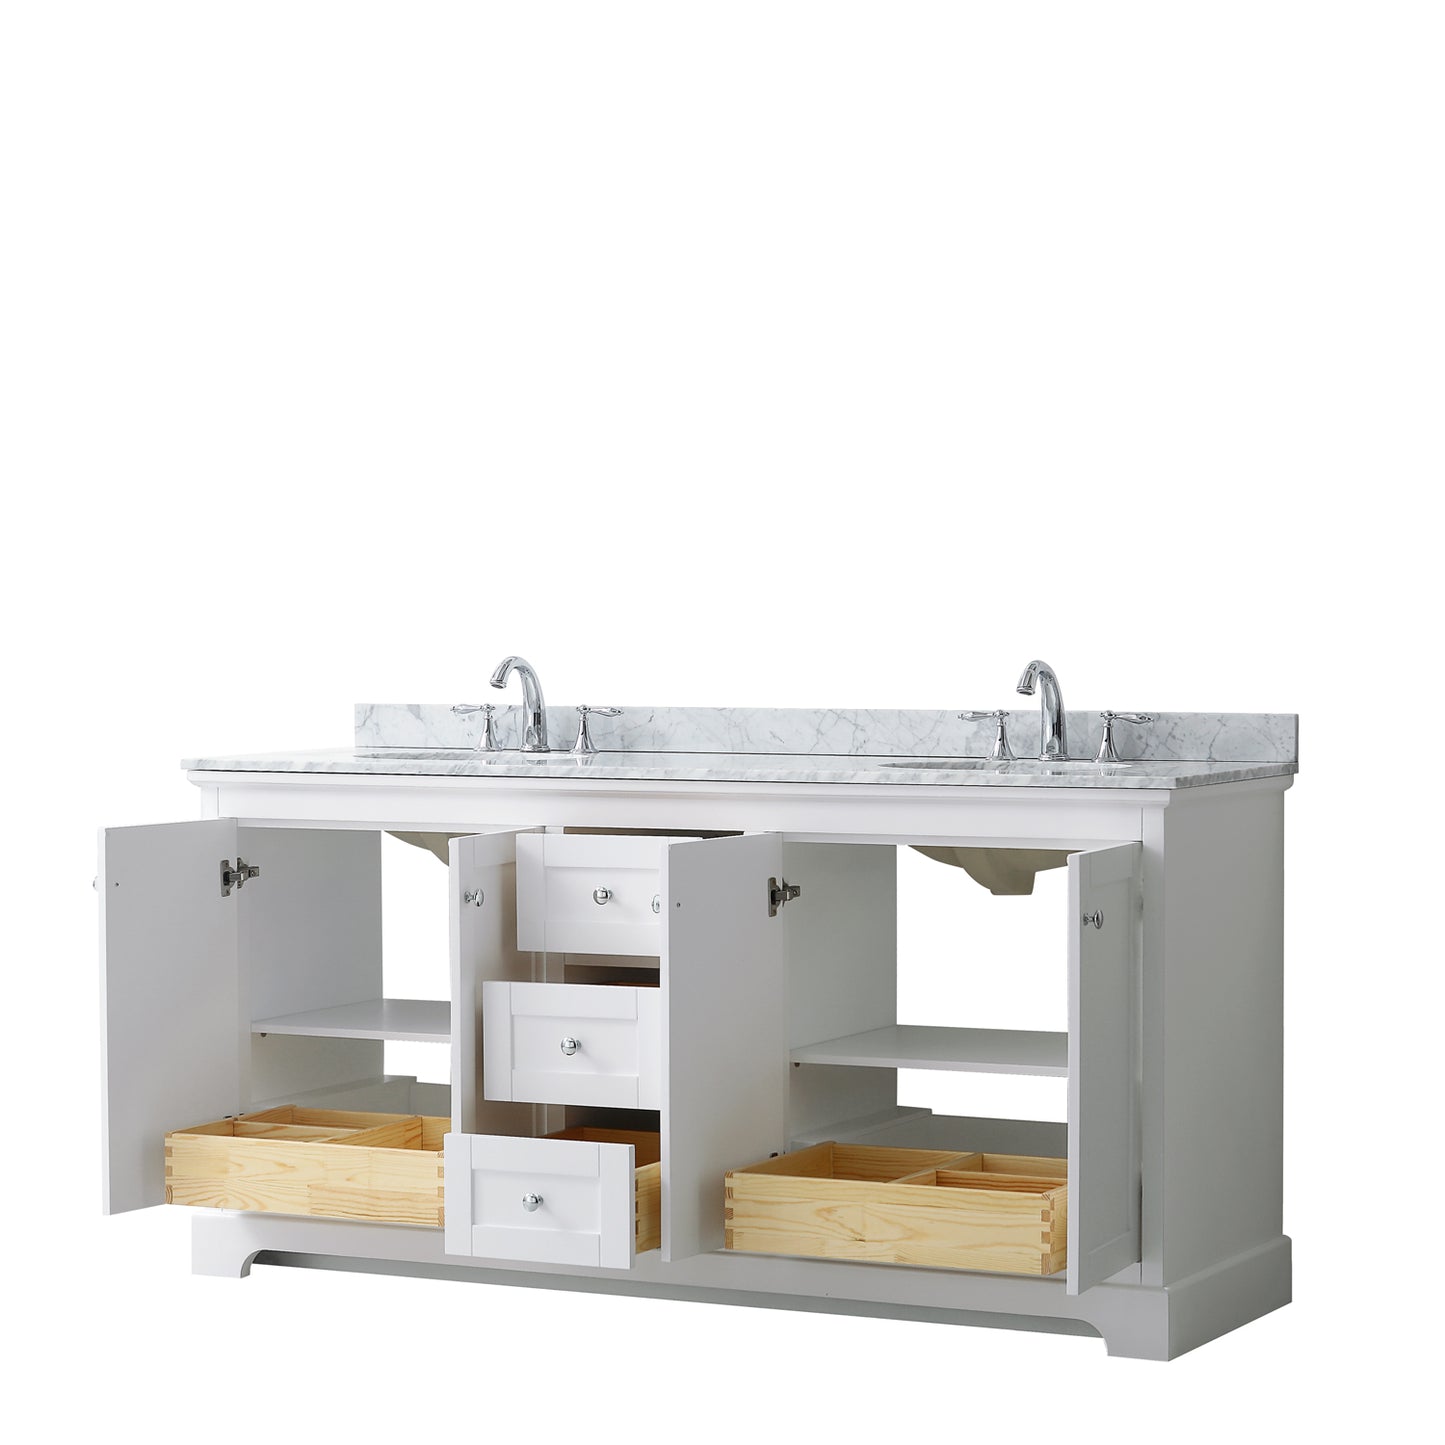 72 Inch Double Bathroom Vanity, White Carrara Marble Countertop, Undermount Oval Sinks, and No Mirror - Luxe Bathroom Vanities Luxury Bathroom Fixtures Bathroom Furniture